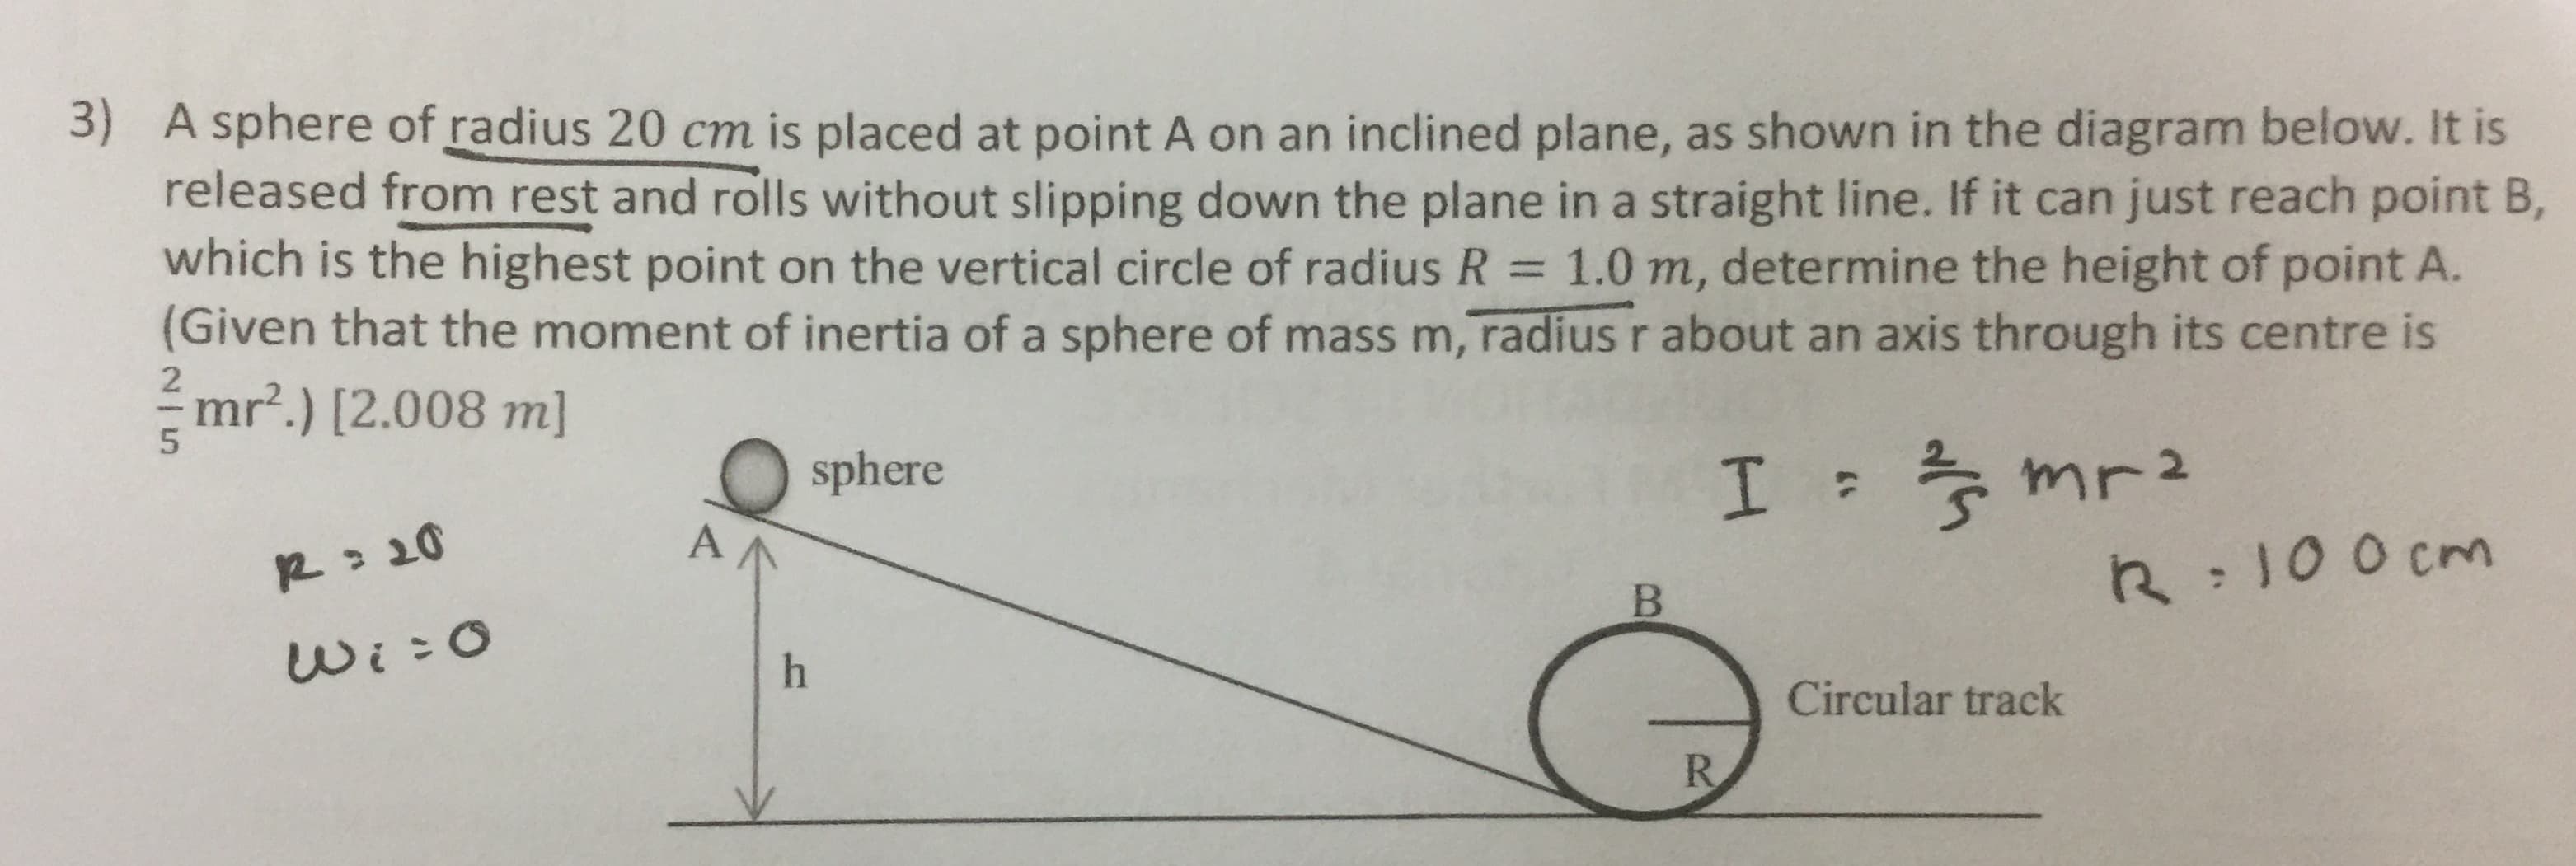 3) A sphere of radius 20 cm is placed at point A on an inclined plane, as shown in the diagram below. It is
released from rest and rolls without slipping down the plane in a straight line. If it can just reach point B,
which is the highest point on the vertical circle of radius R = 1.0 m, determine the height of point A.
(Given that the moment of inertia of a sphere of mass m, radius r about an axis through its centre is
mr².) [2.008 m]
sphere
* mr2
R: 20
R:100 cm
Wi:0
Circular track
R.
B.
